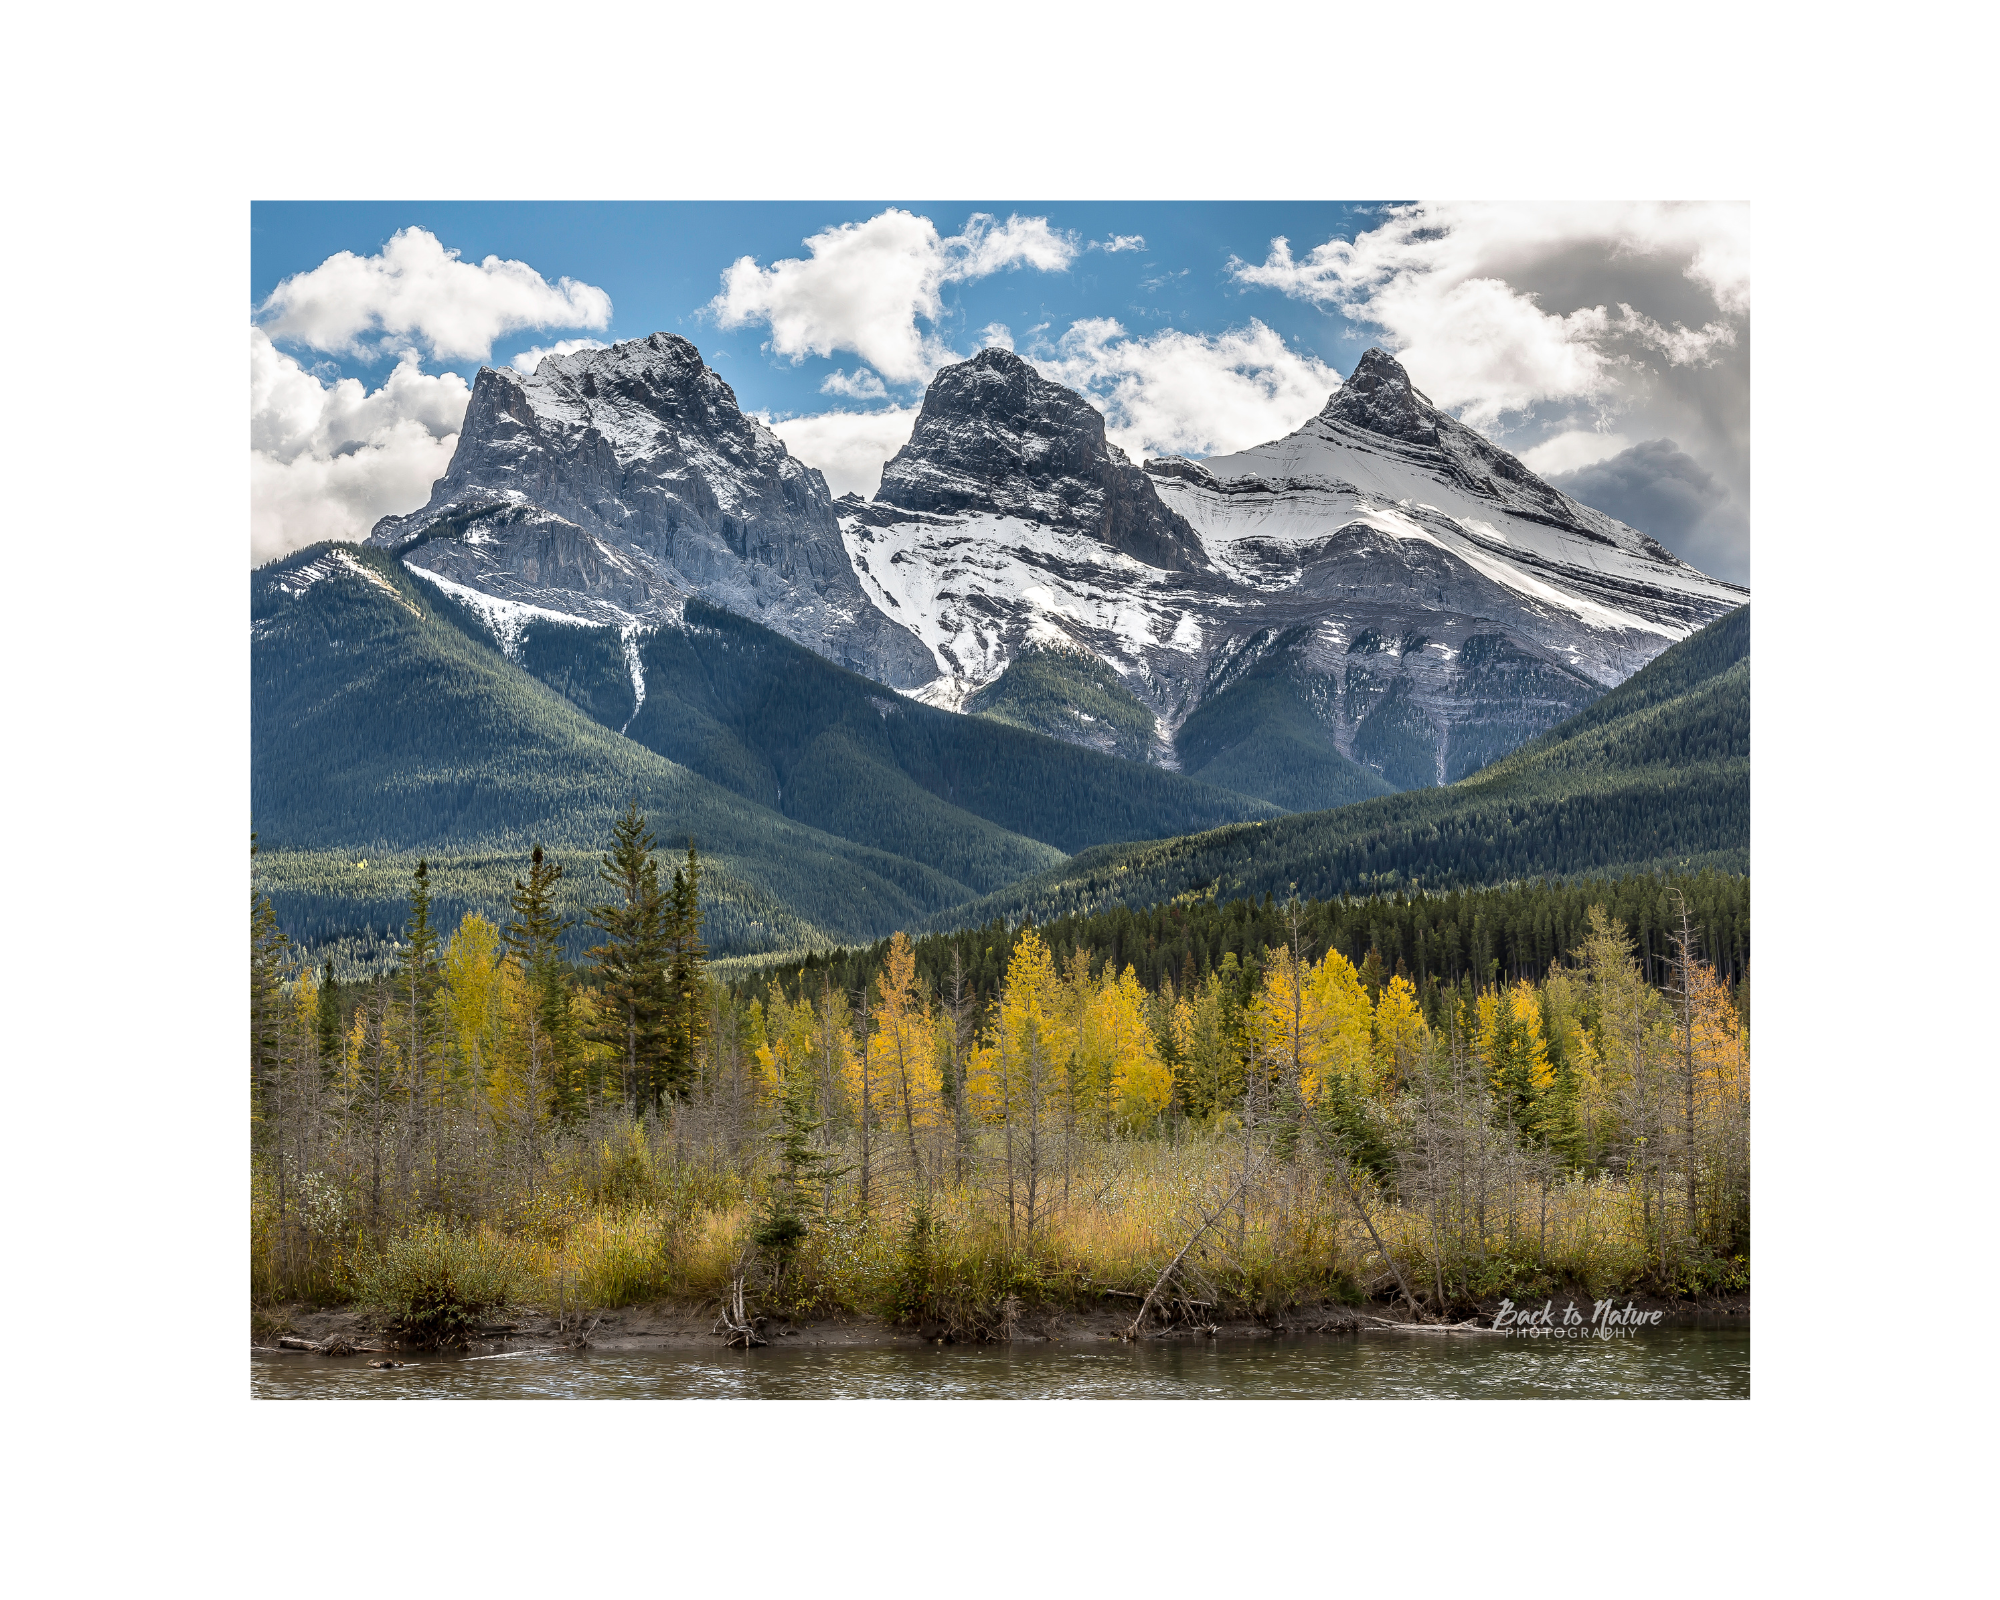 "Three Sisters" Mountain Scene Canmore Alberta - 10" x 8" Matted Print